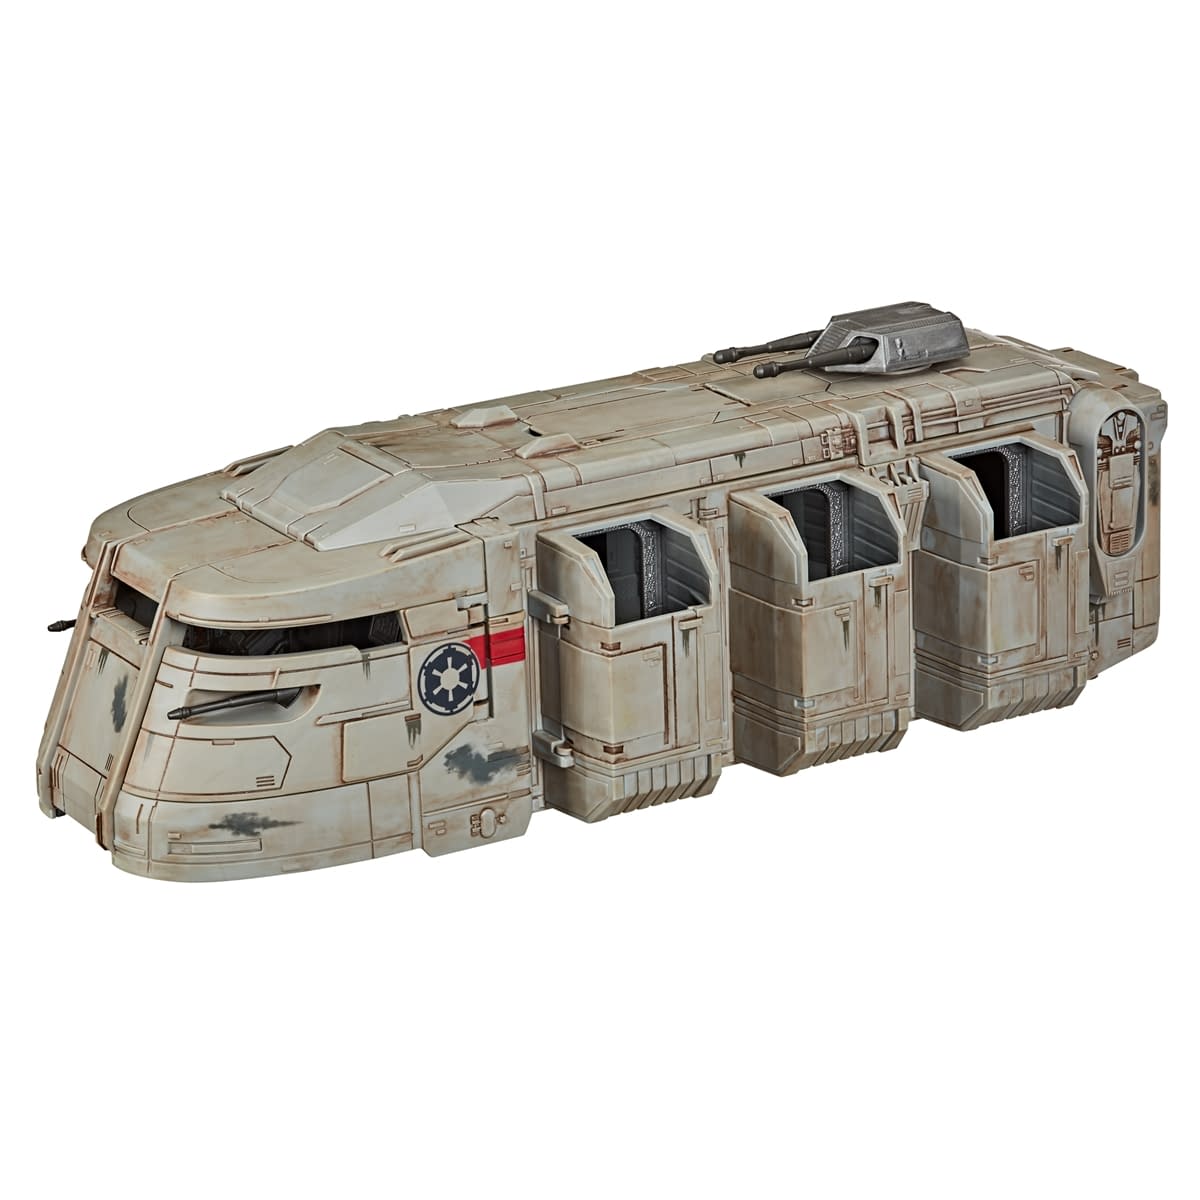 "The Mandalorian" Troop Transport Goes Vintage With Hasbro